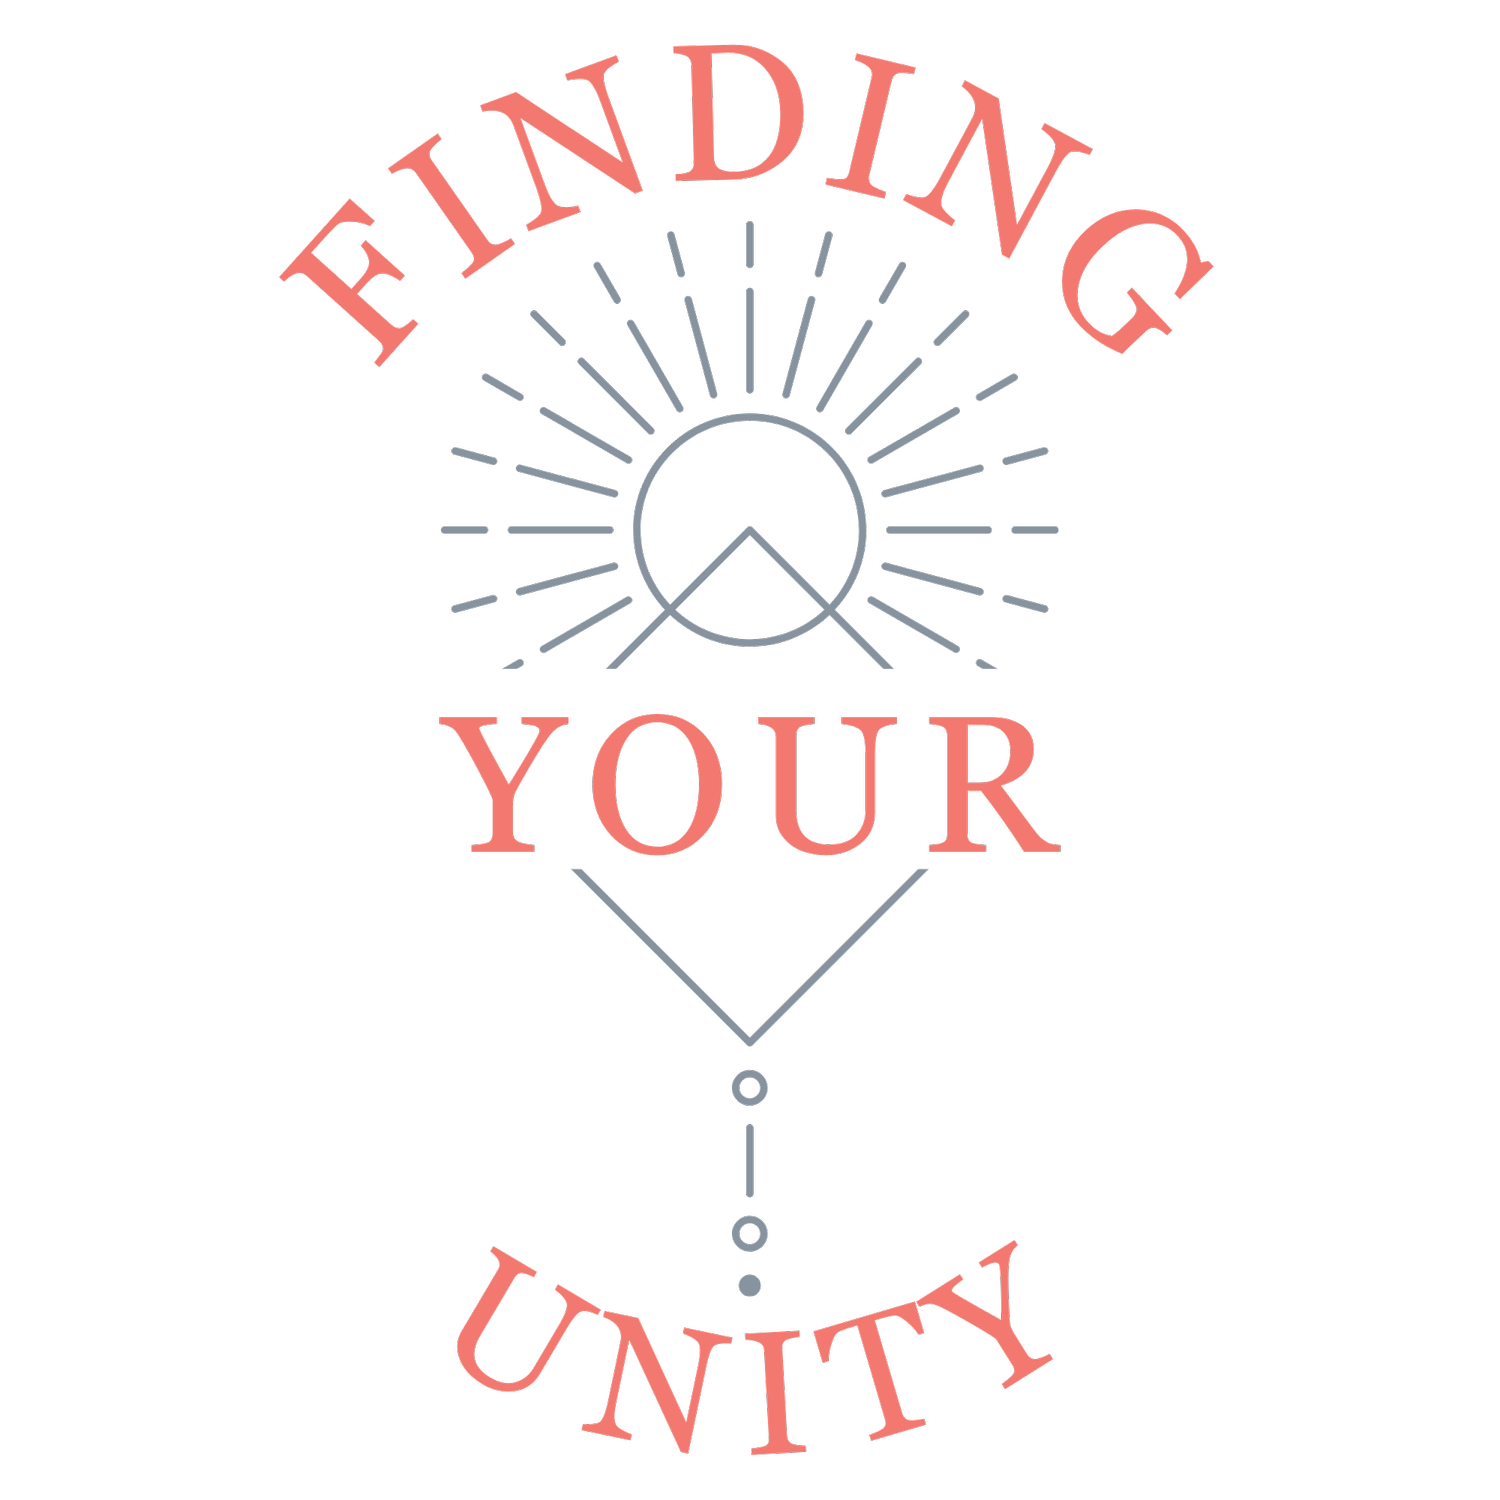 Finding Your Unity